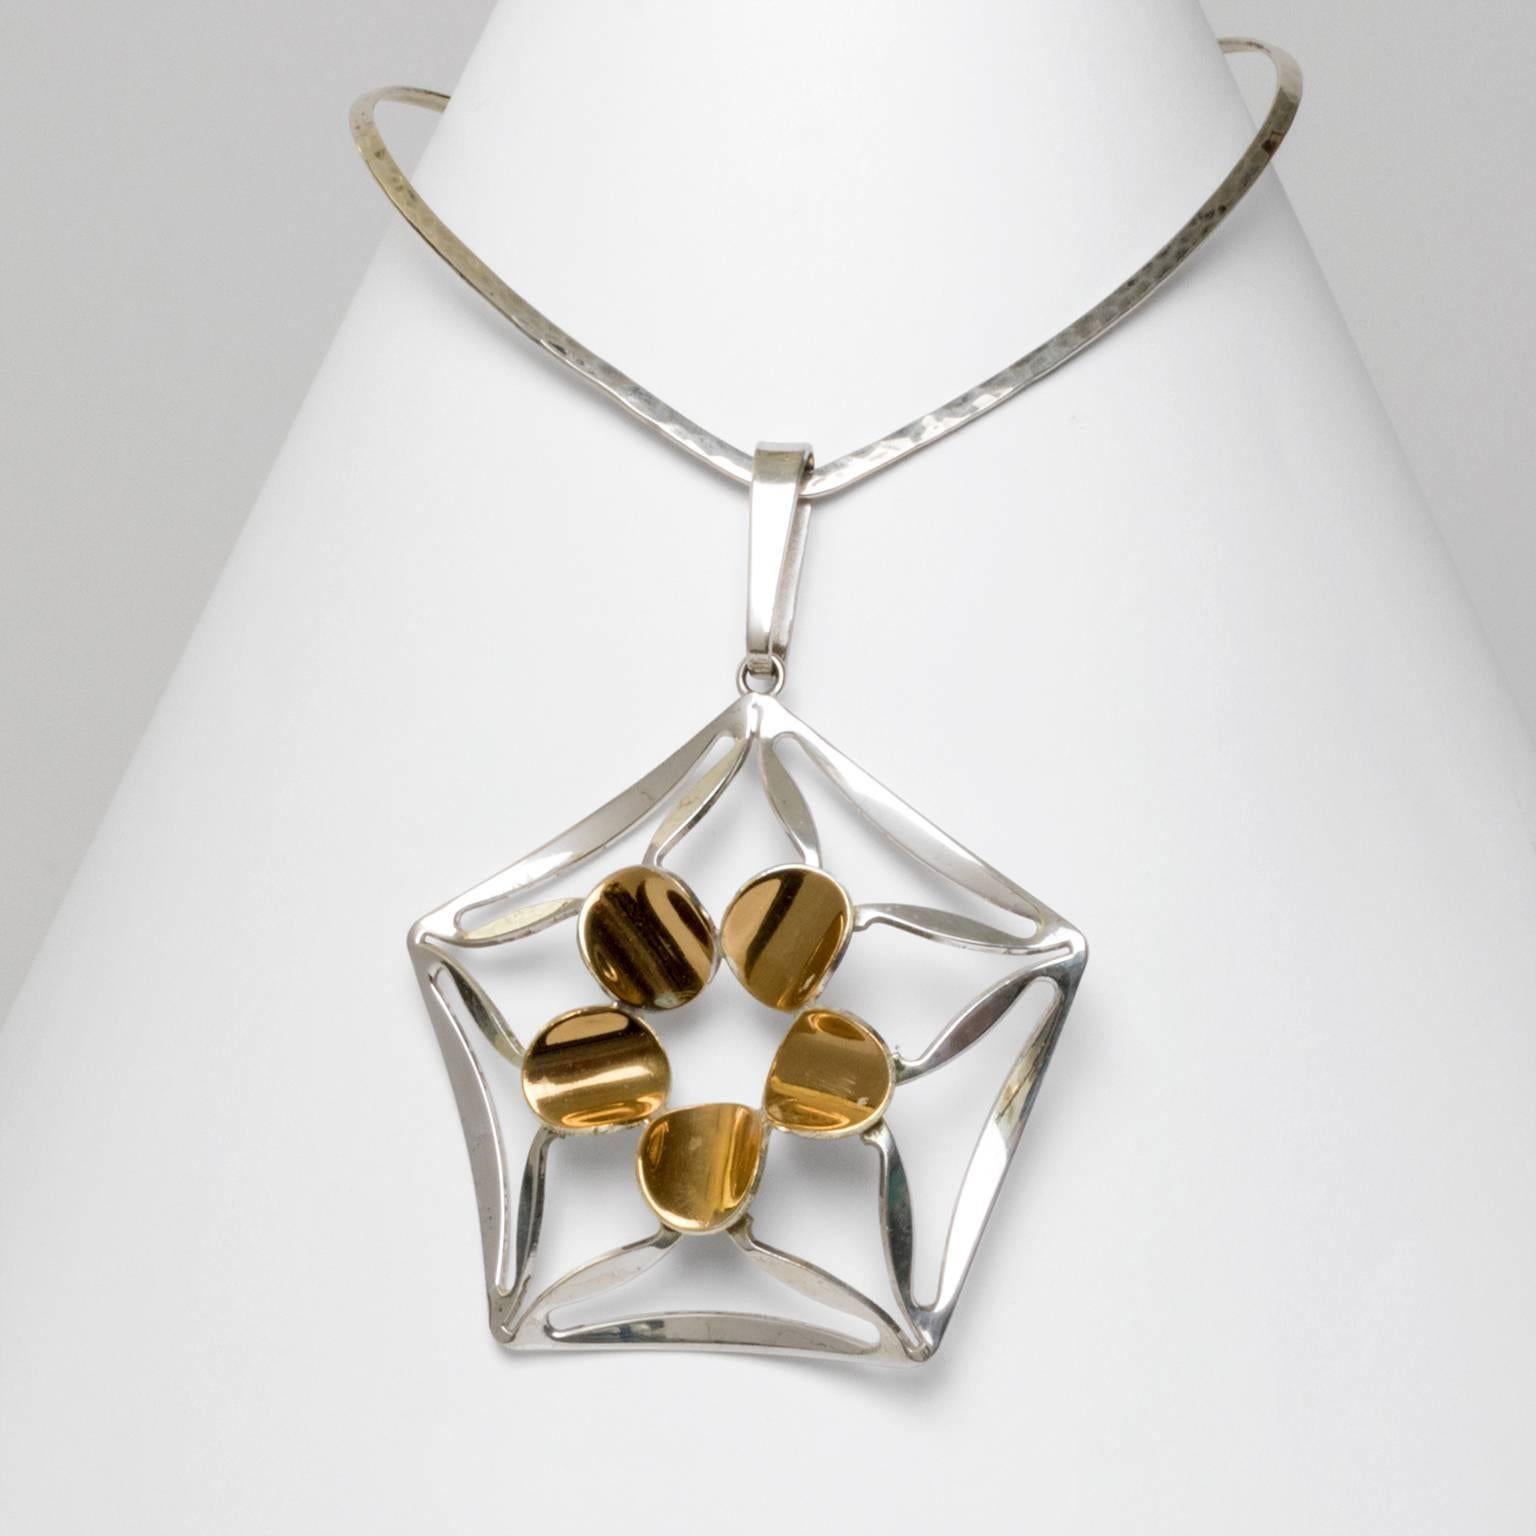 A silver necklace with pentagonal pendant with gilded details. Designed by K.E. Palmberg for Alton, Falkoping, Sweden.
Diameter: 5